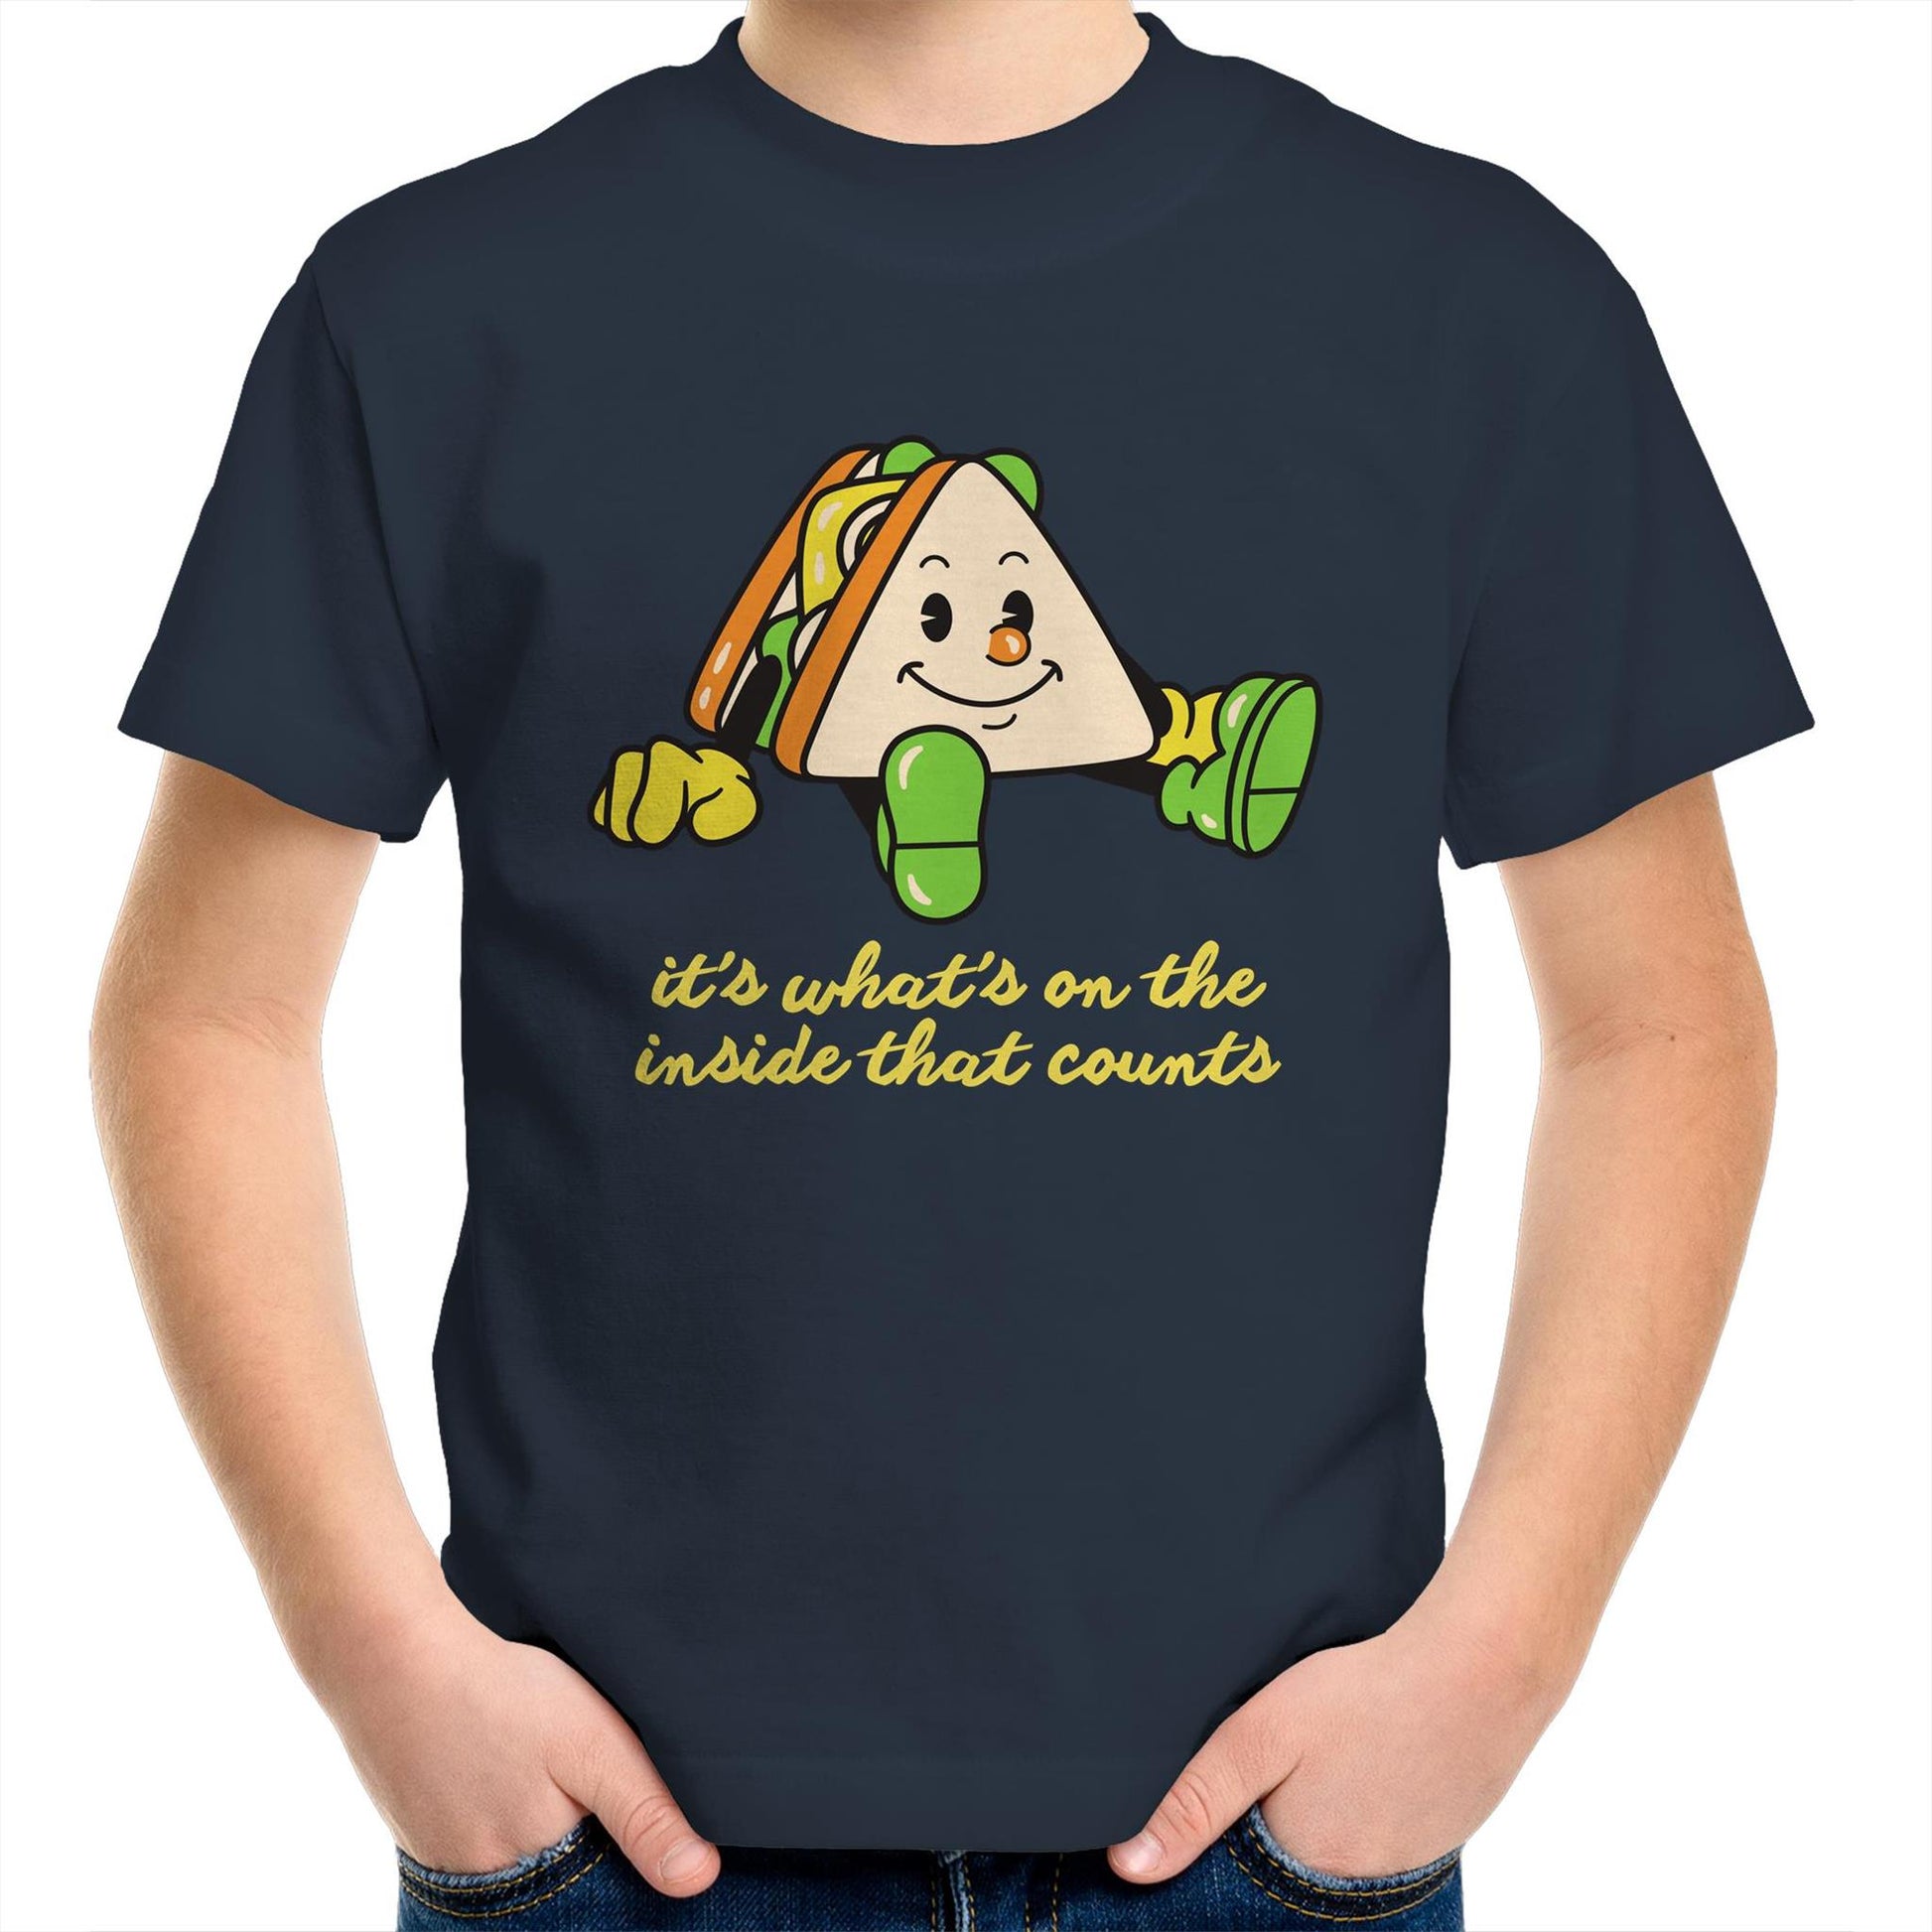 Sandwich, It's What's On The Inside That Counts - Kids Youth T-Shirt Navy Kids Youth T-shirt Food Motivation